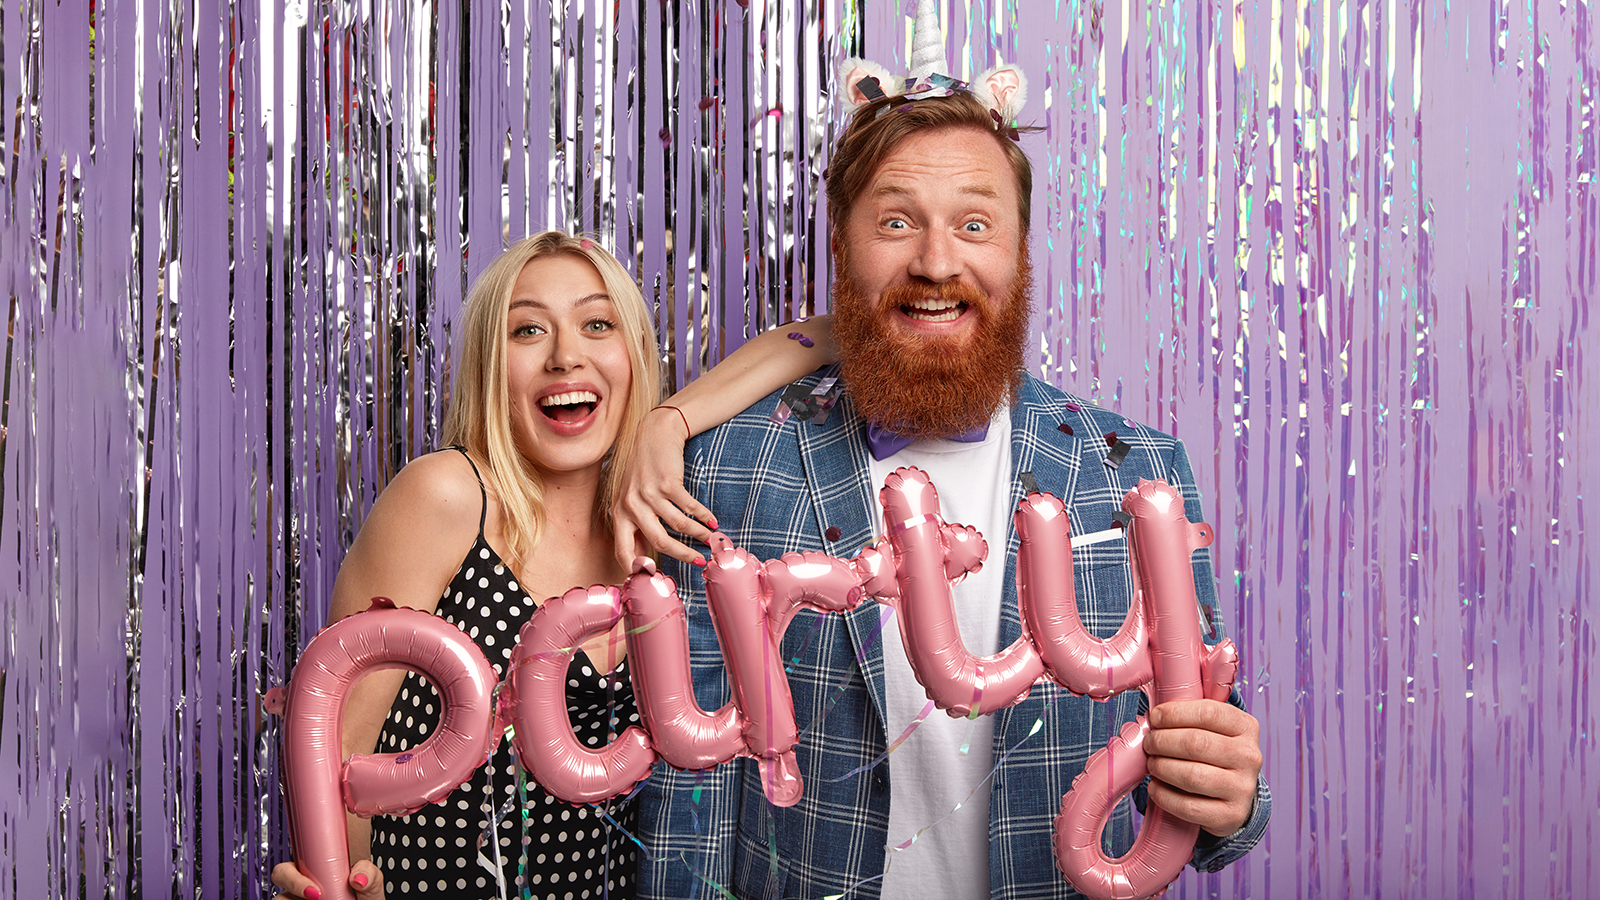 Joyous couple stand next to each other, have fun indoor, pose in decorated photozone, enjoys spare time, hold pink balloons in form of letters, have overjoyed facial expressions invite friends to join